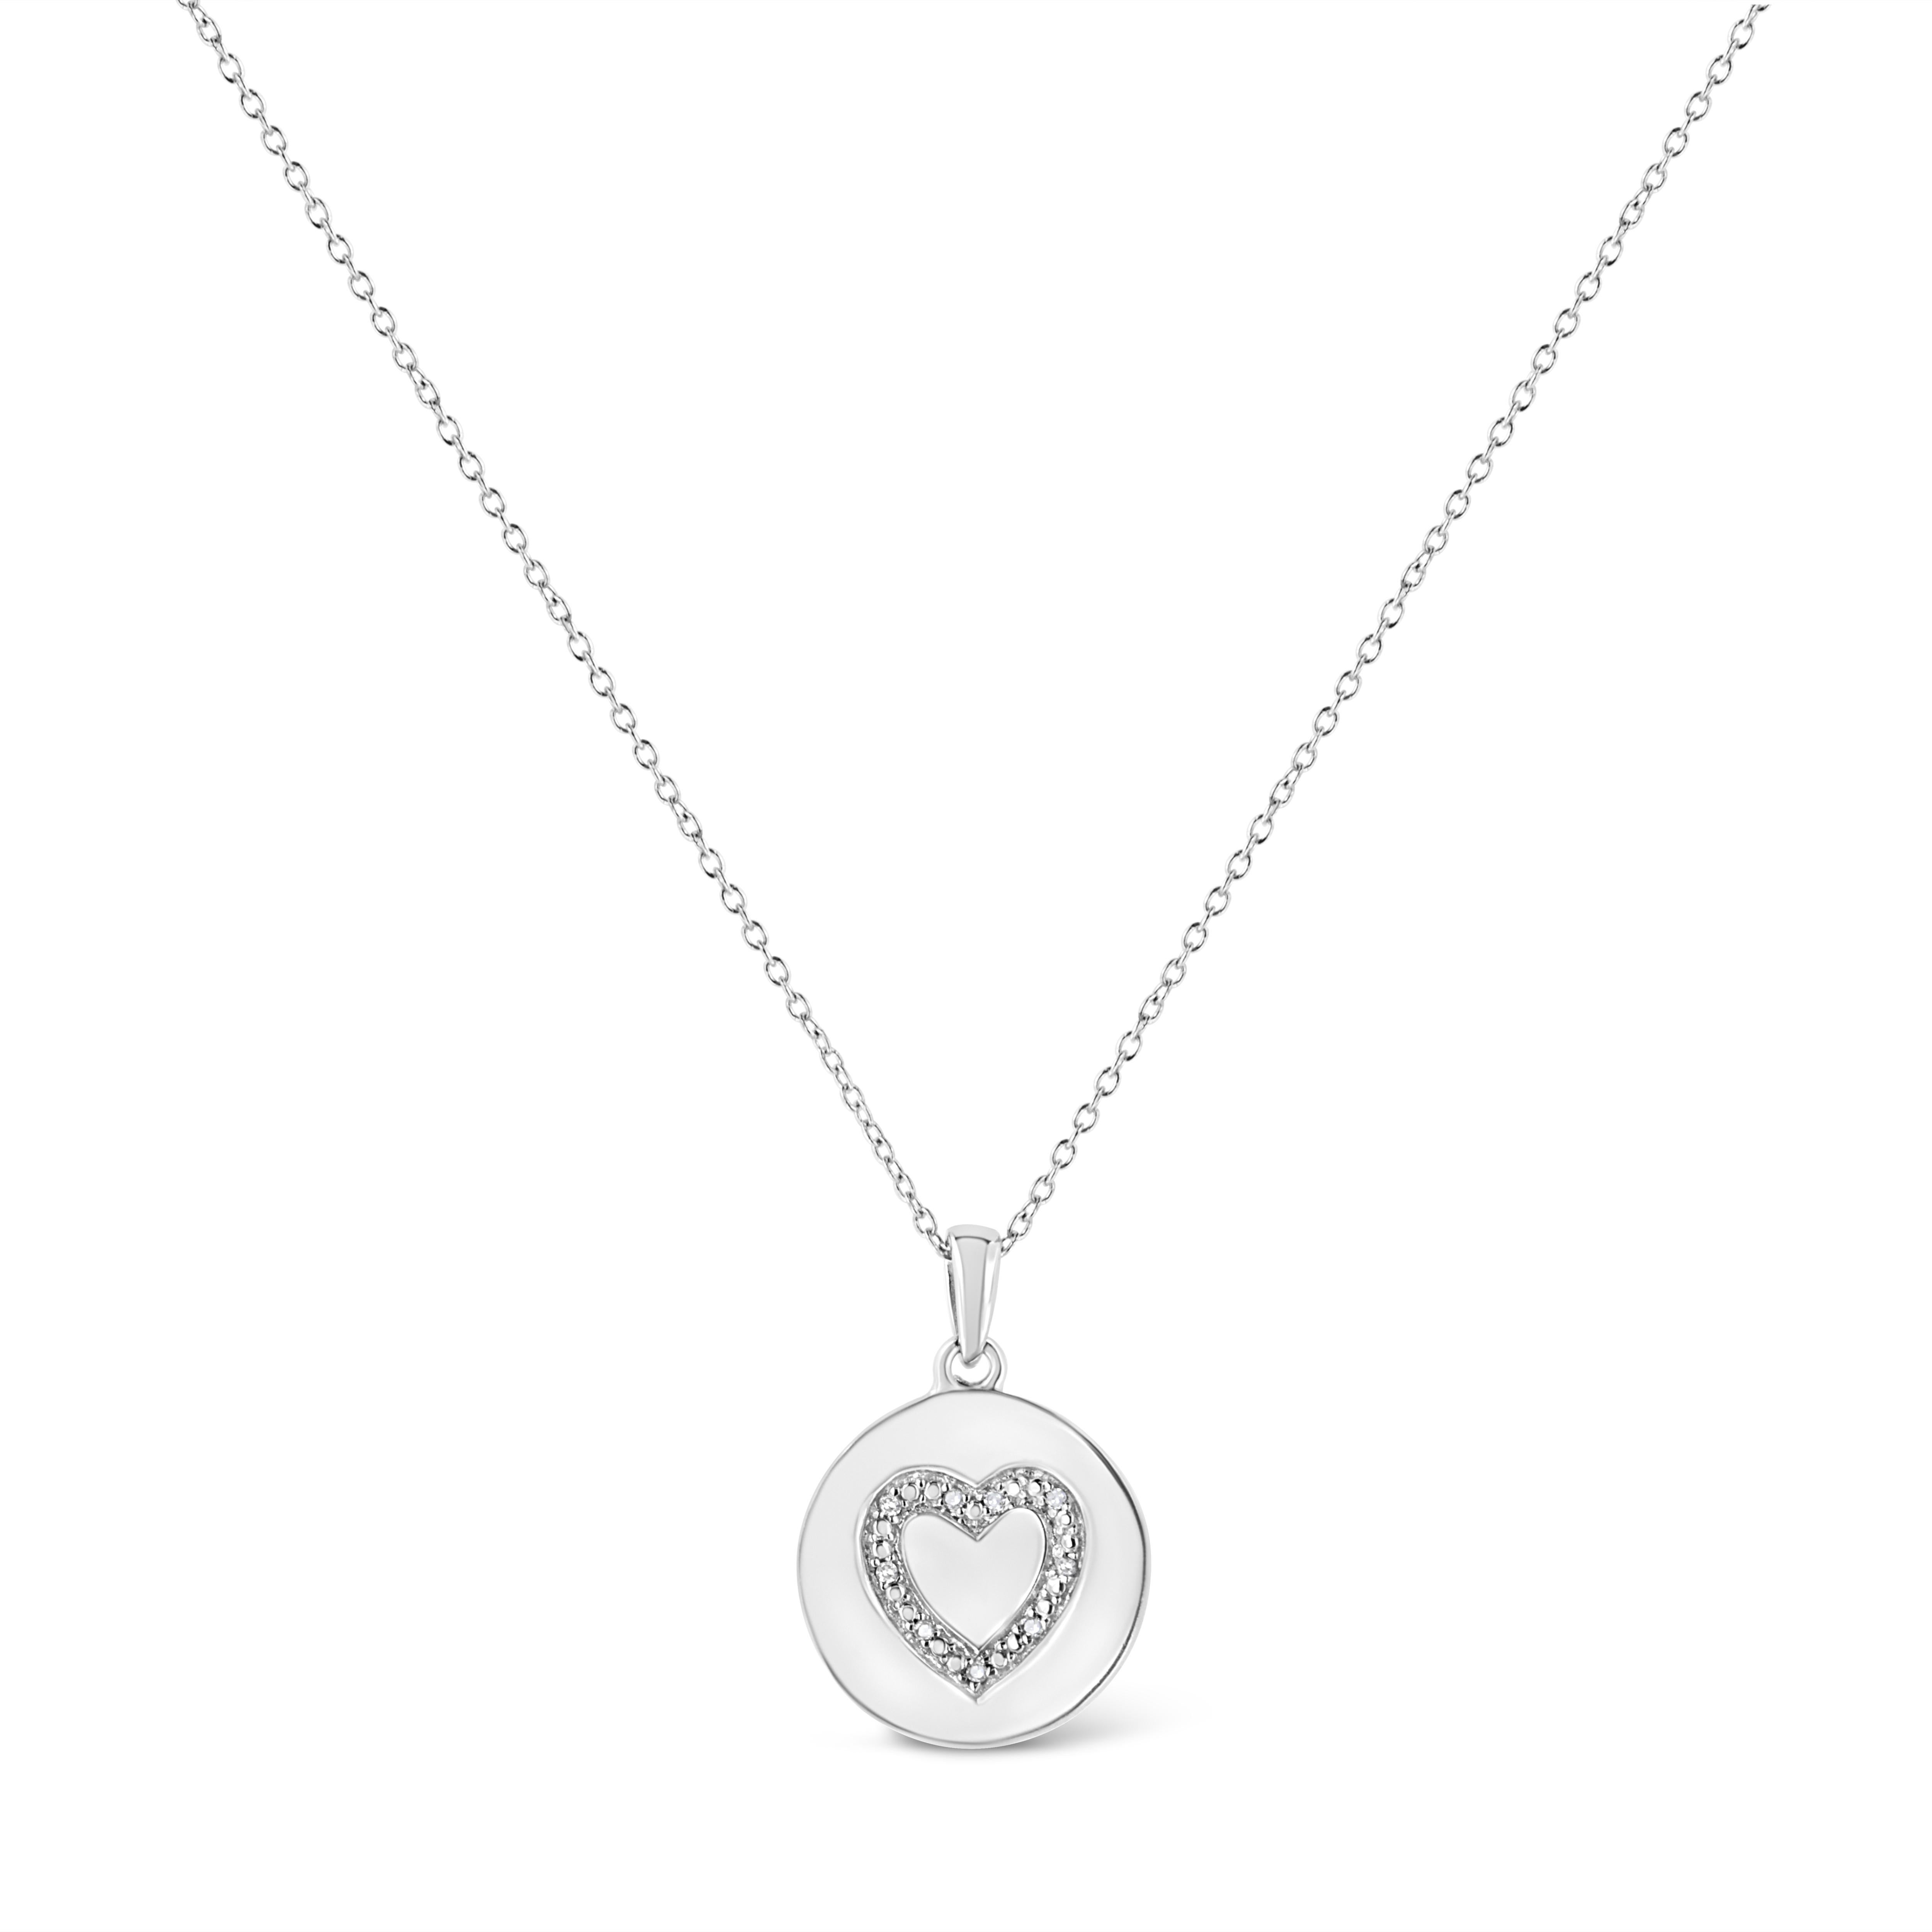 Tie an adorable heart on her neck. The heart shape of the pendant is stamped inside of a brushed sterling silver circle and is perfectly accented with a sprinkling of sparkling 9 share prong set single cut diamonds. The pendant hangs from a